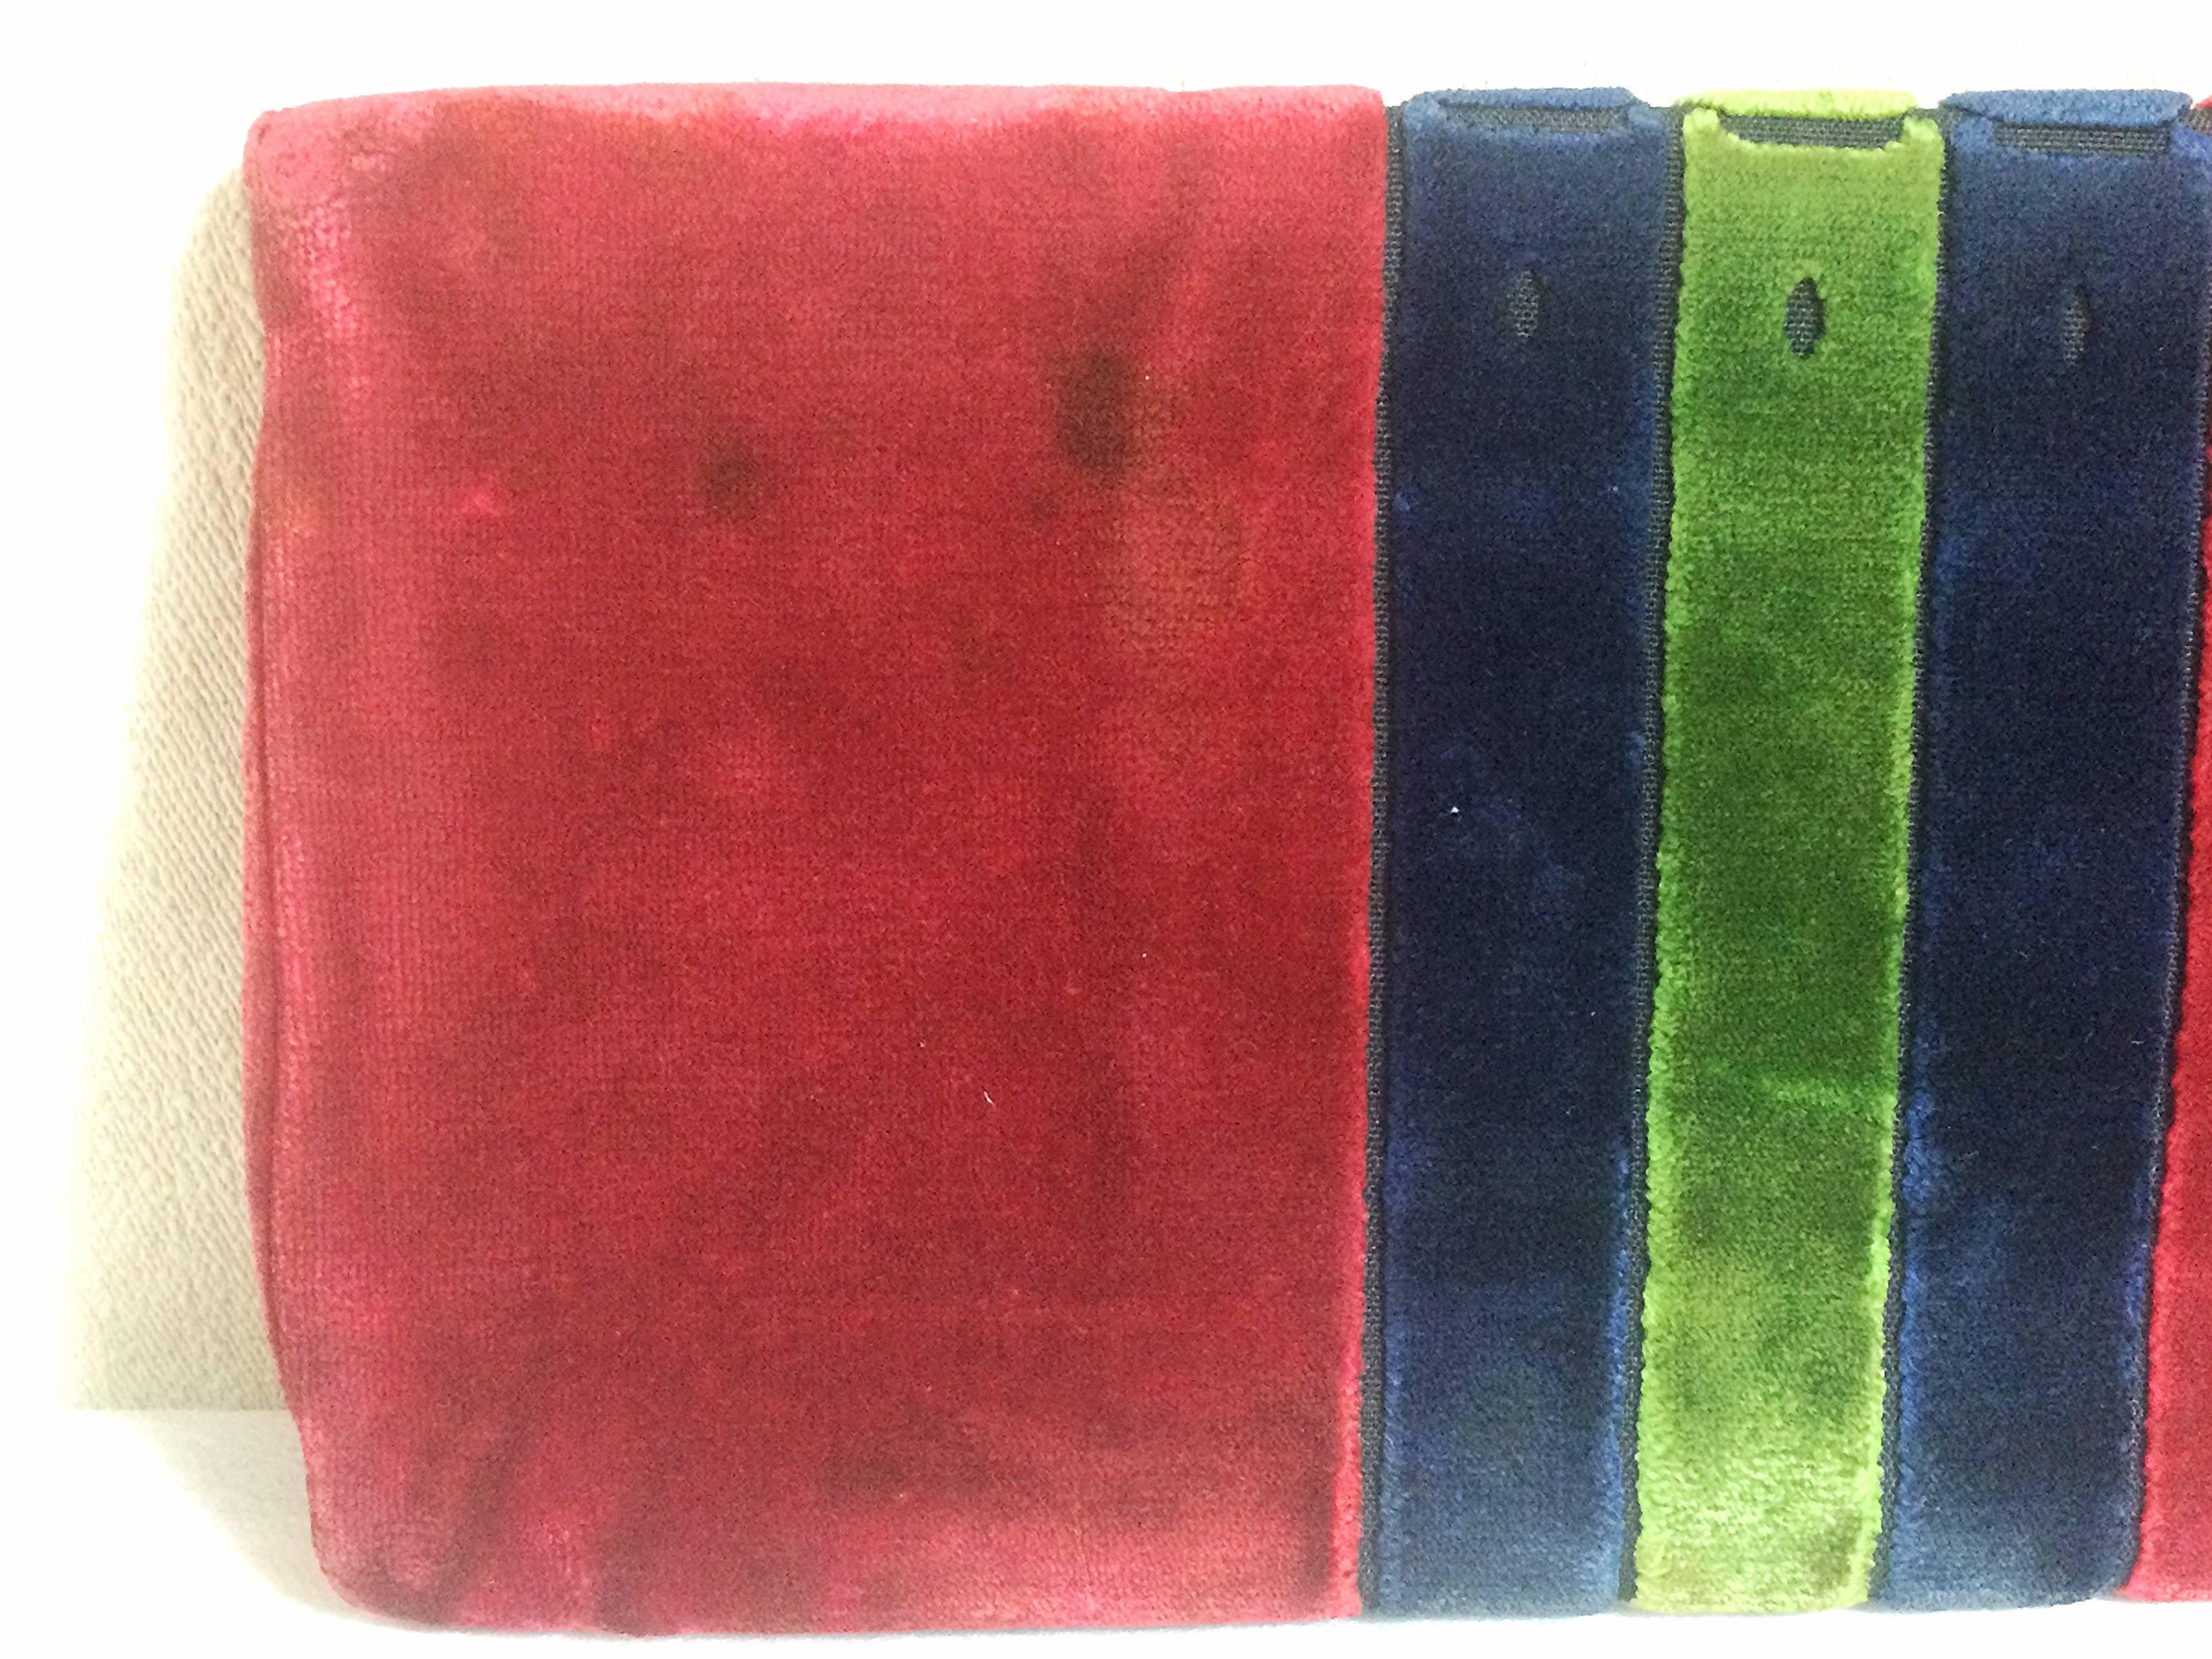 Women's 80's Vintage Roberta di Camerino velvet, chenille clutch in red, navy and green.